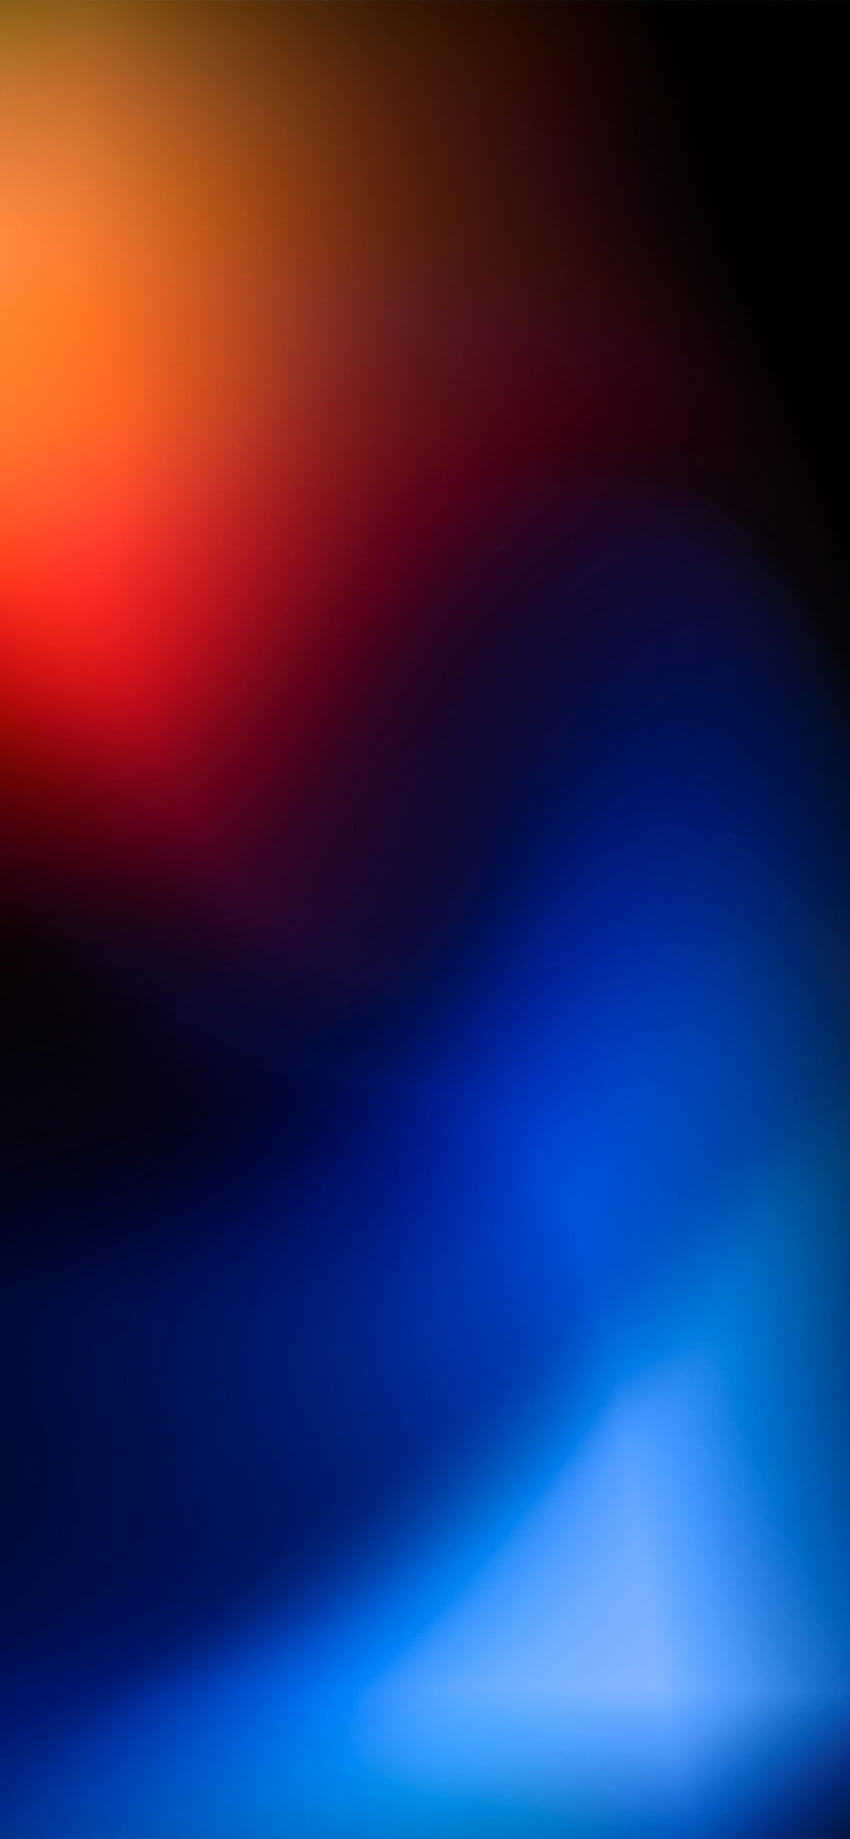 Orange to blue and black gradient by @Hk3ToN on iPhone, black and orange iphone HD phone wallpaper